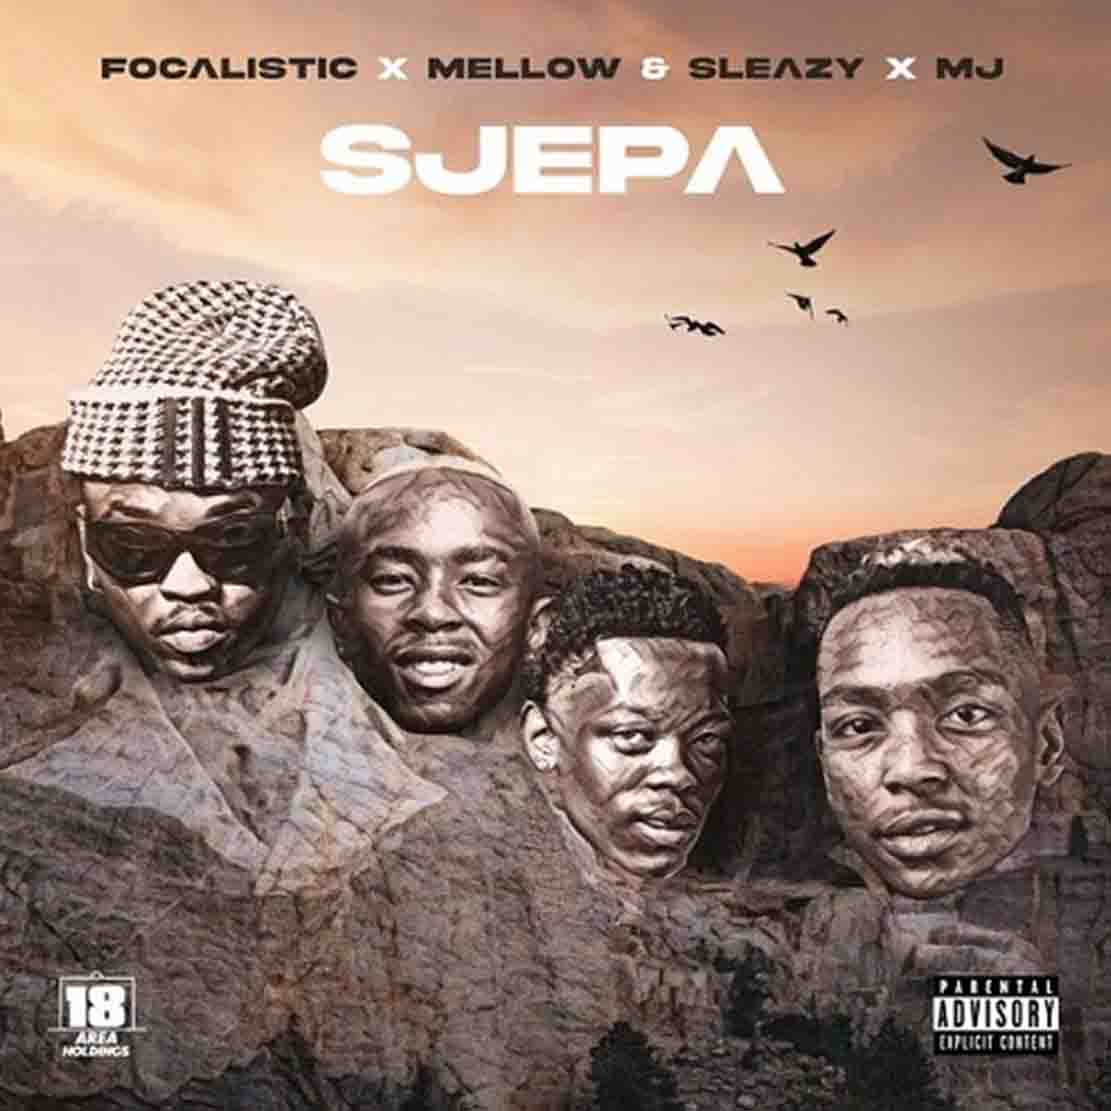 Focalistic - SJEPA ft M.J , Mellow & Sleazy (African Music Mp3)